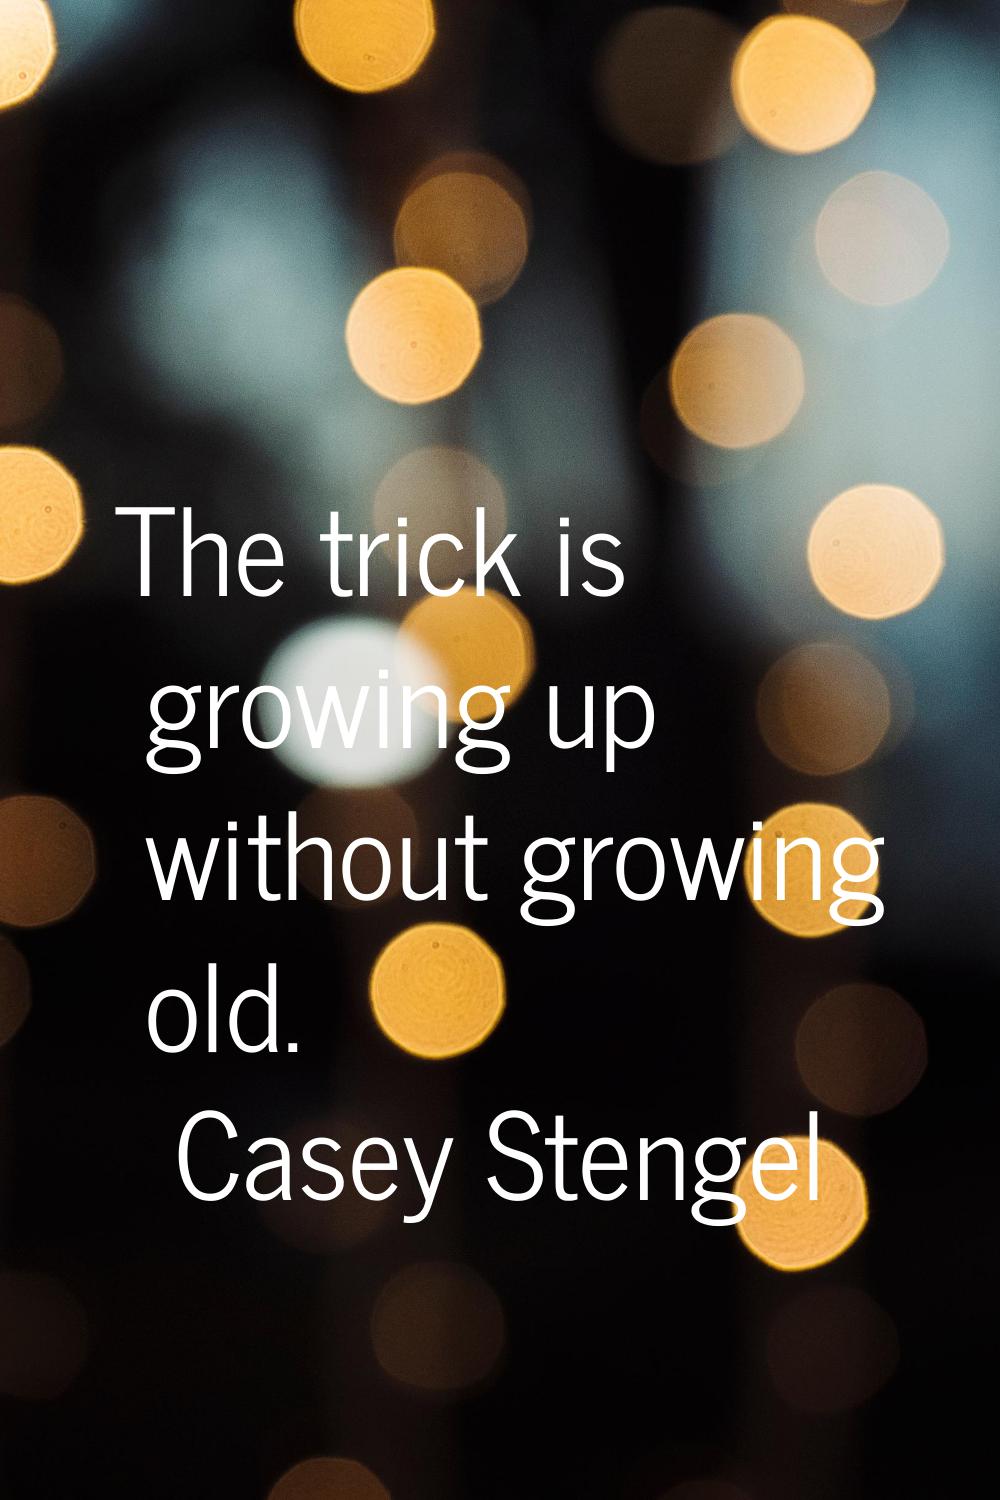 The trick is growing up without growing old.